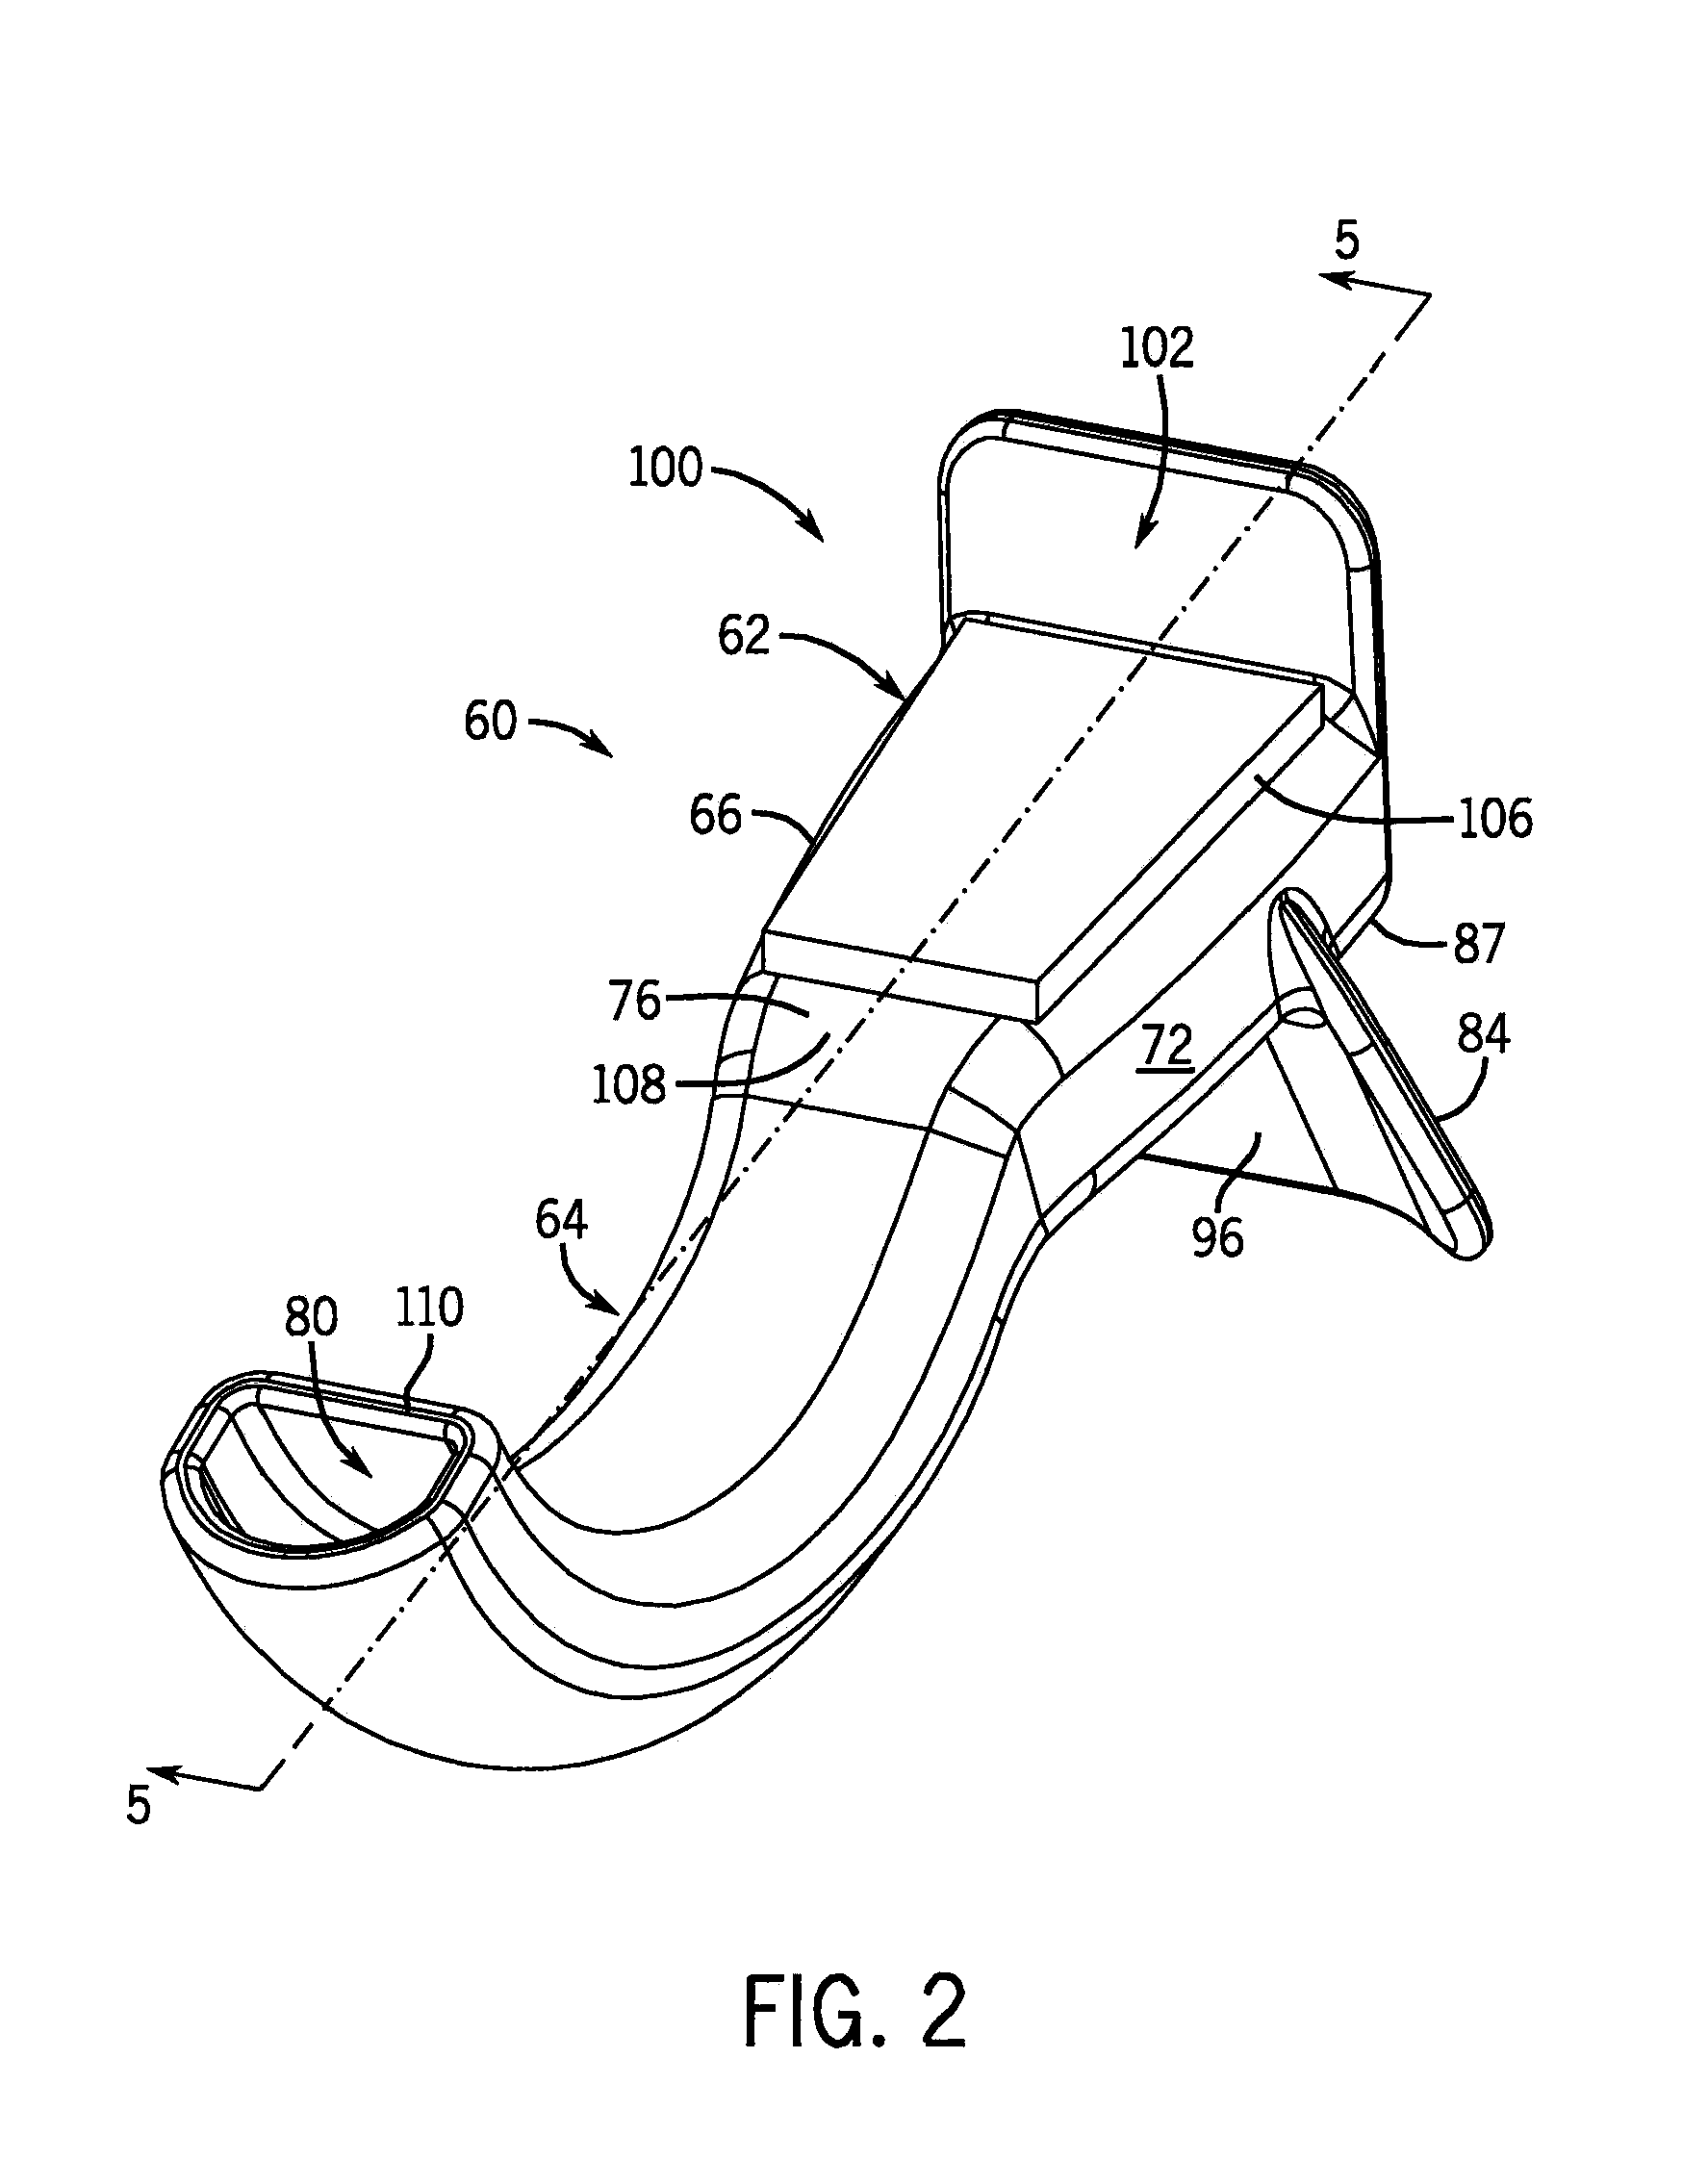 Oropharyngeal Device for Assisting Oral Ventilation of a Patient